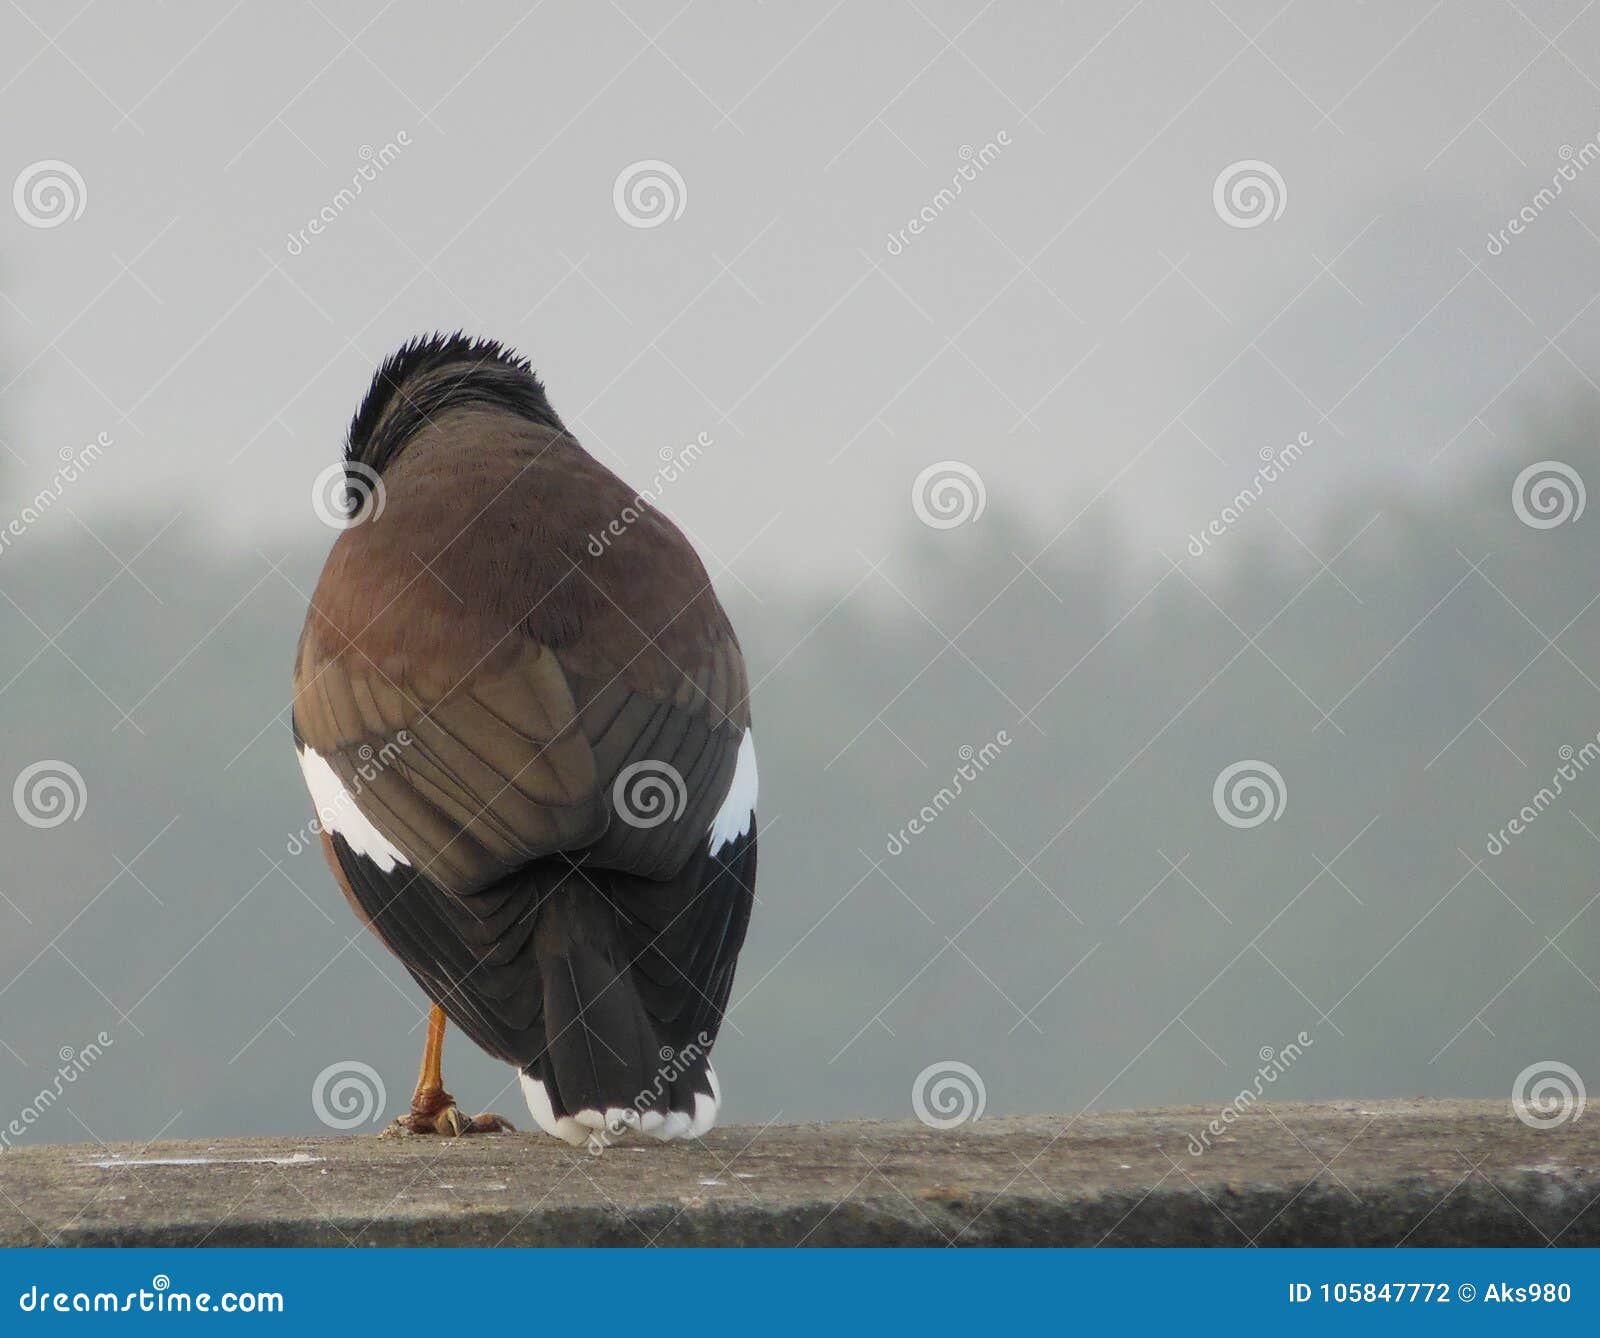 Common Myna bird stock photo. Image of humans, feather - 105847772